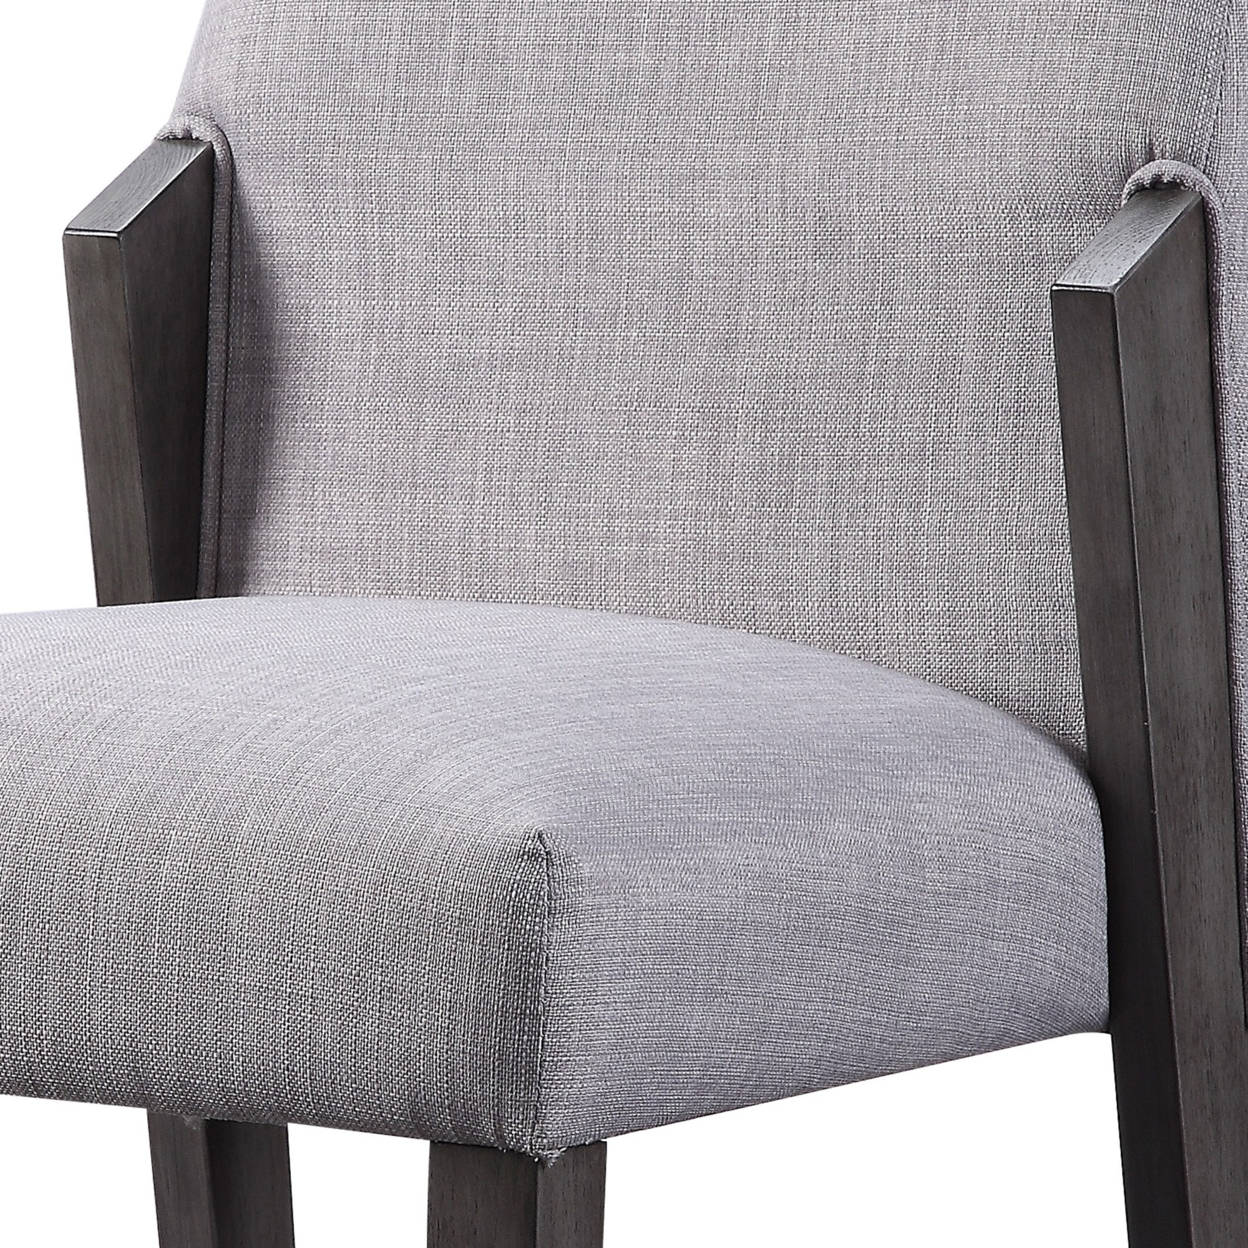 Wood And Fabric Upholstered Dining Chairs, Set Of 2, Gray And Black- Saltoro Sherpi